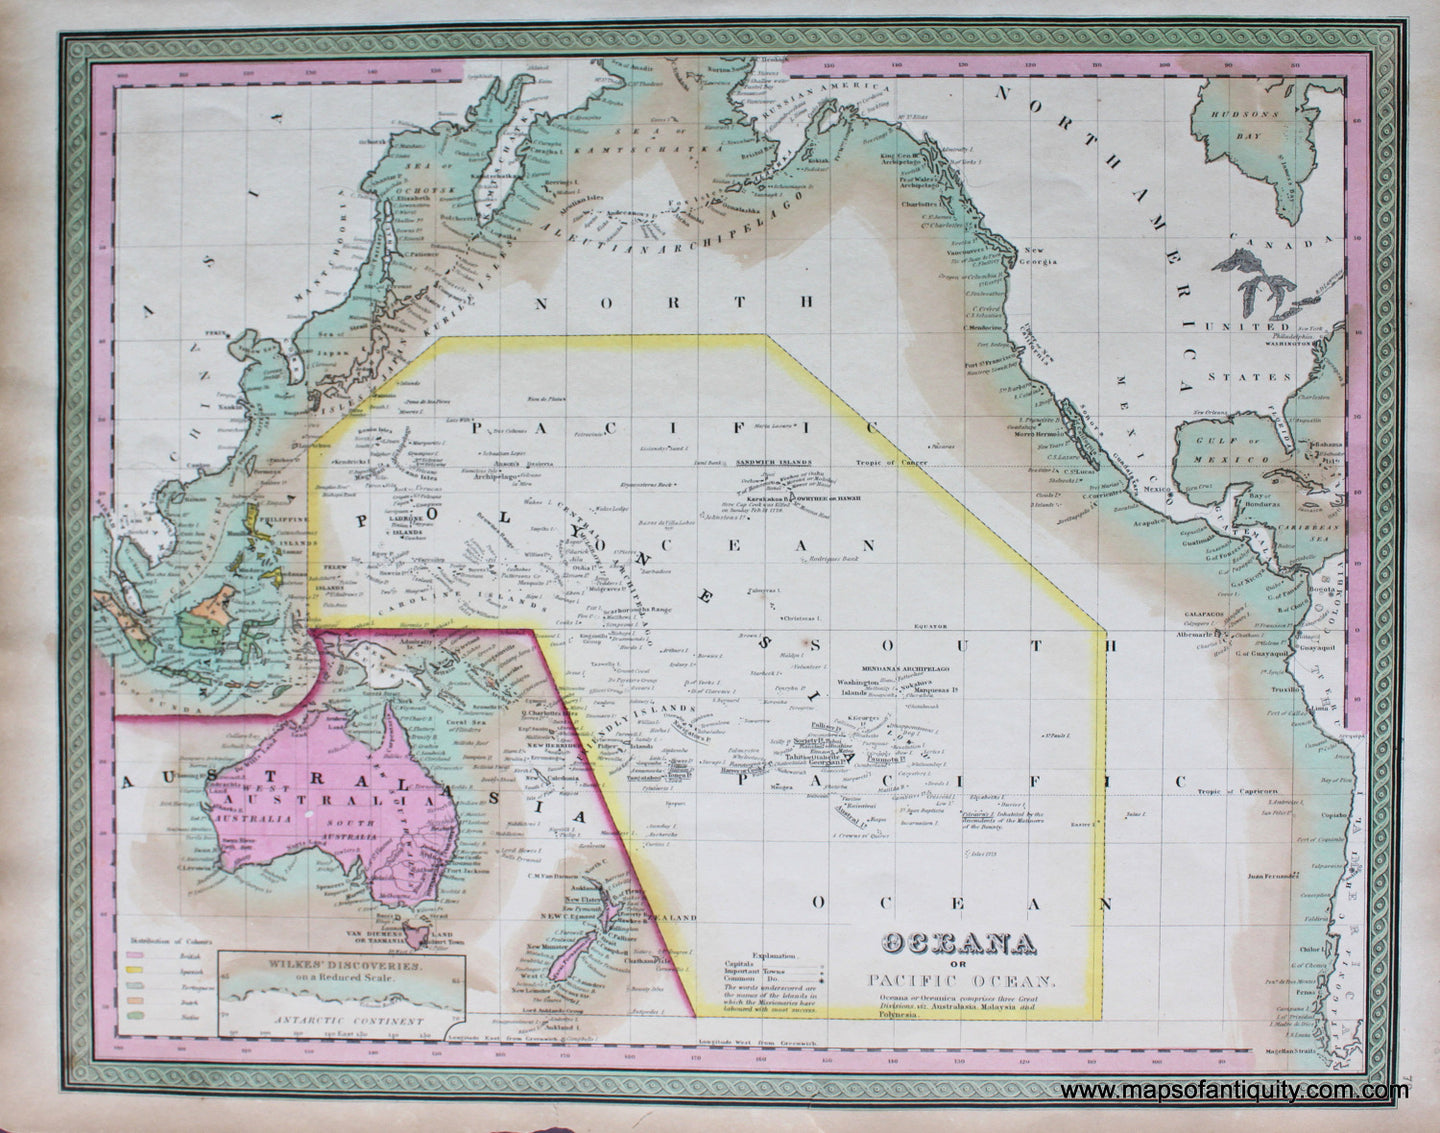 Antique-Hand-Colored-Map-Oceana-or-Pacific-Ocean-Oceania---1848-Mitchell/Cowperthwait-Desilver-&-Butler-Maps-Of-Antiquity